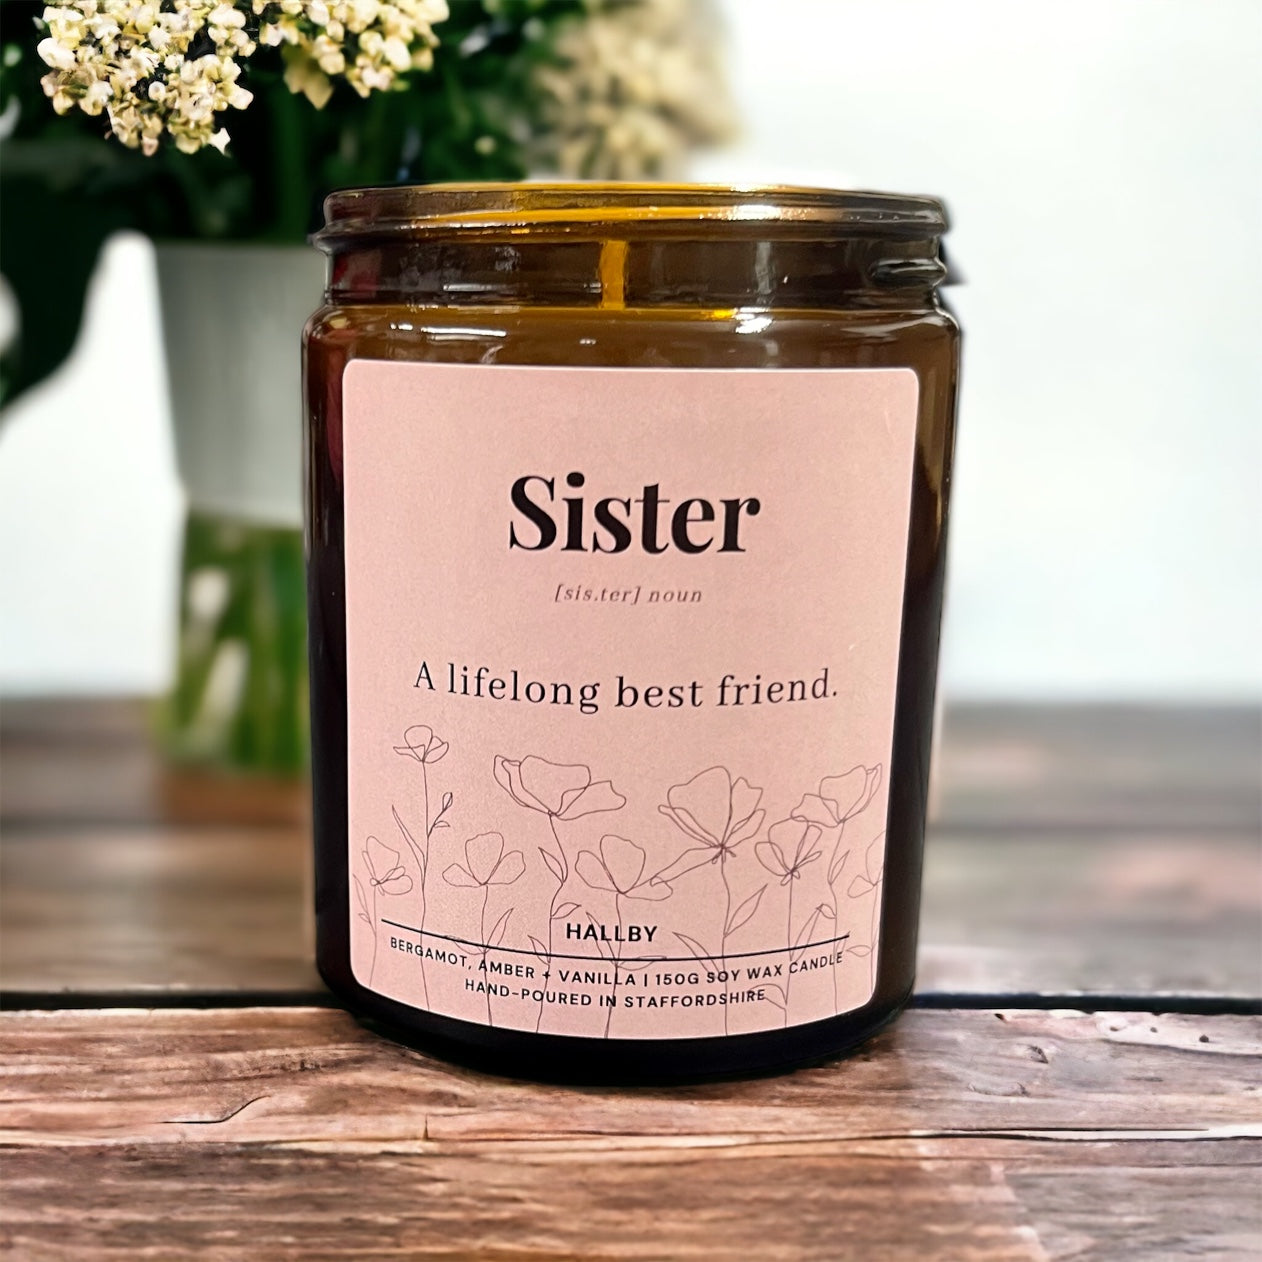 Candle and Coaster Gift for sister sister gift sister treat sister gift box birthday gift candle sister candle